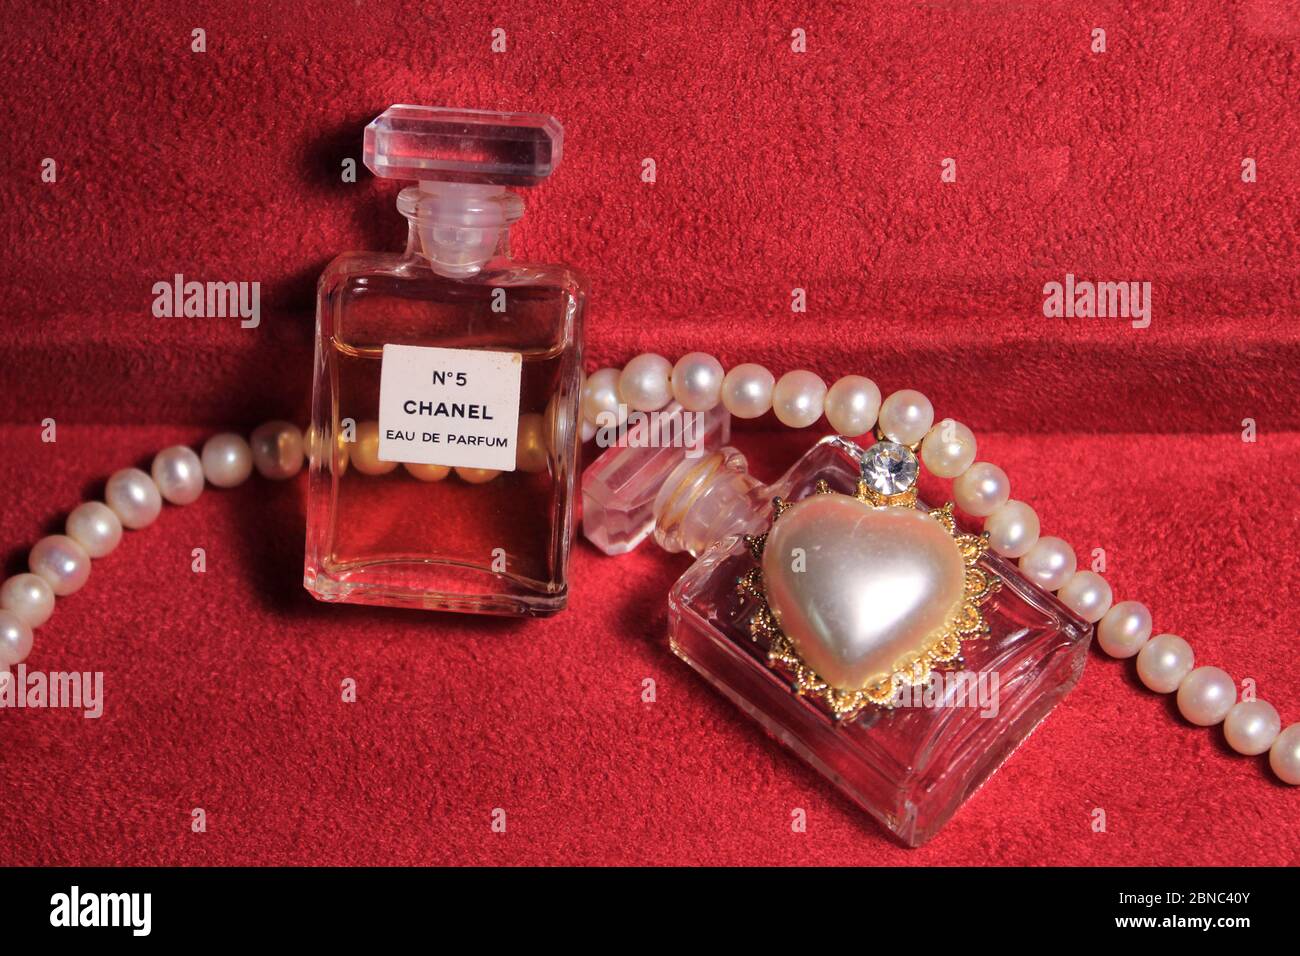 Chanel Perfume Bottle Isolated on Red & Blue Background. Bottle with Coco  Chanel Perfume Product Editorial Stock Photo - Image of female, bottles:  182869533